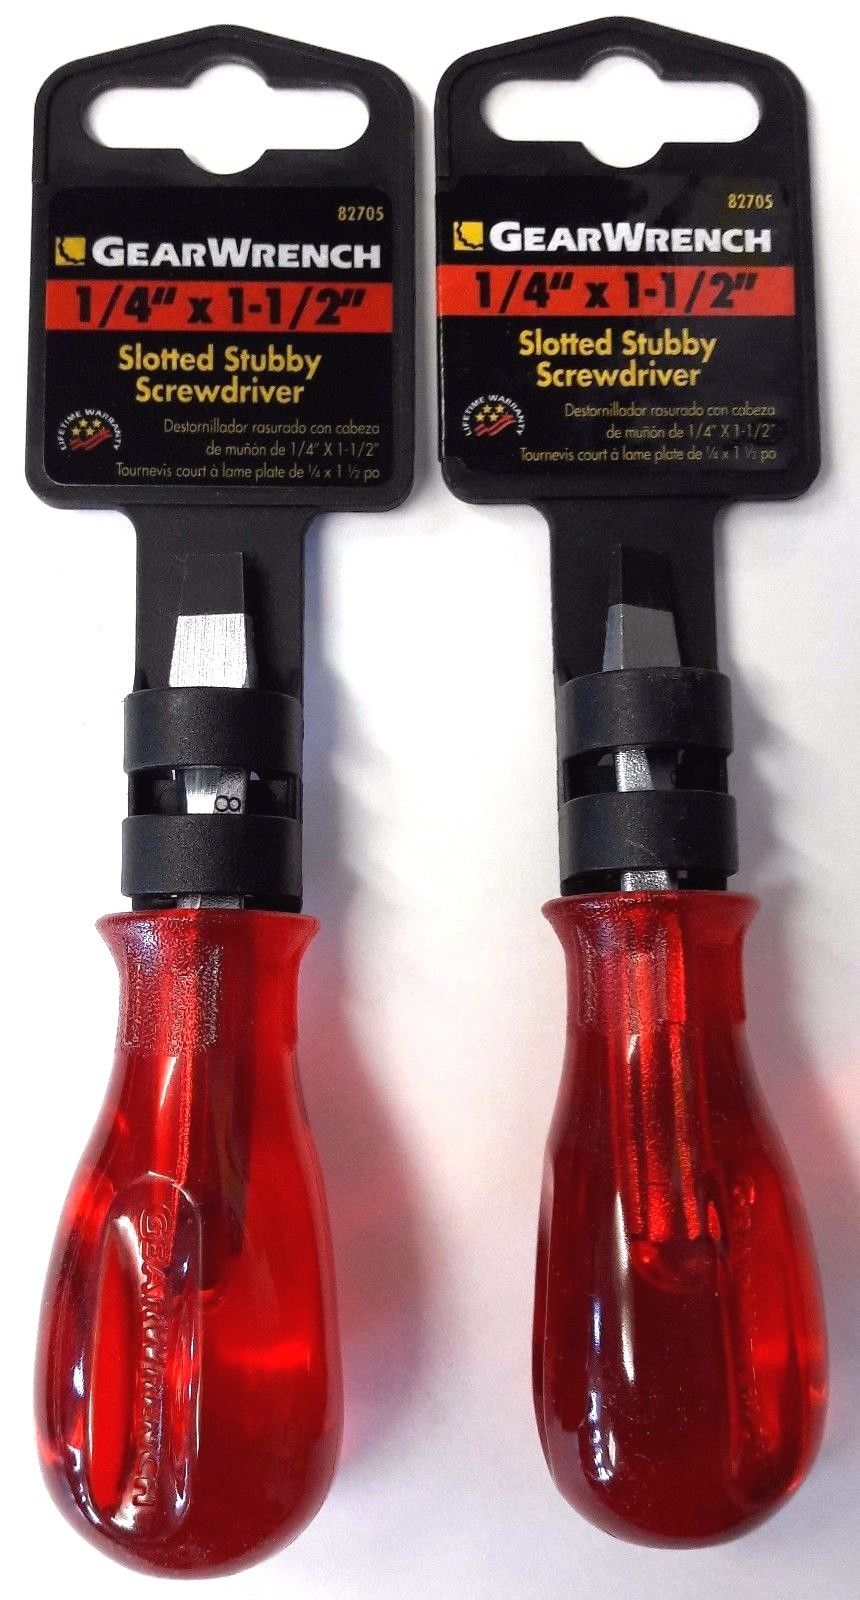 GearWrench 82705 1/4 x 1-1/2'' Stubby Slotted Screwdriver 2PCS